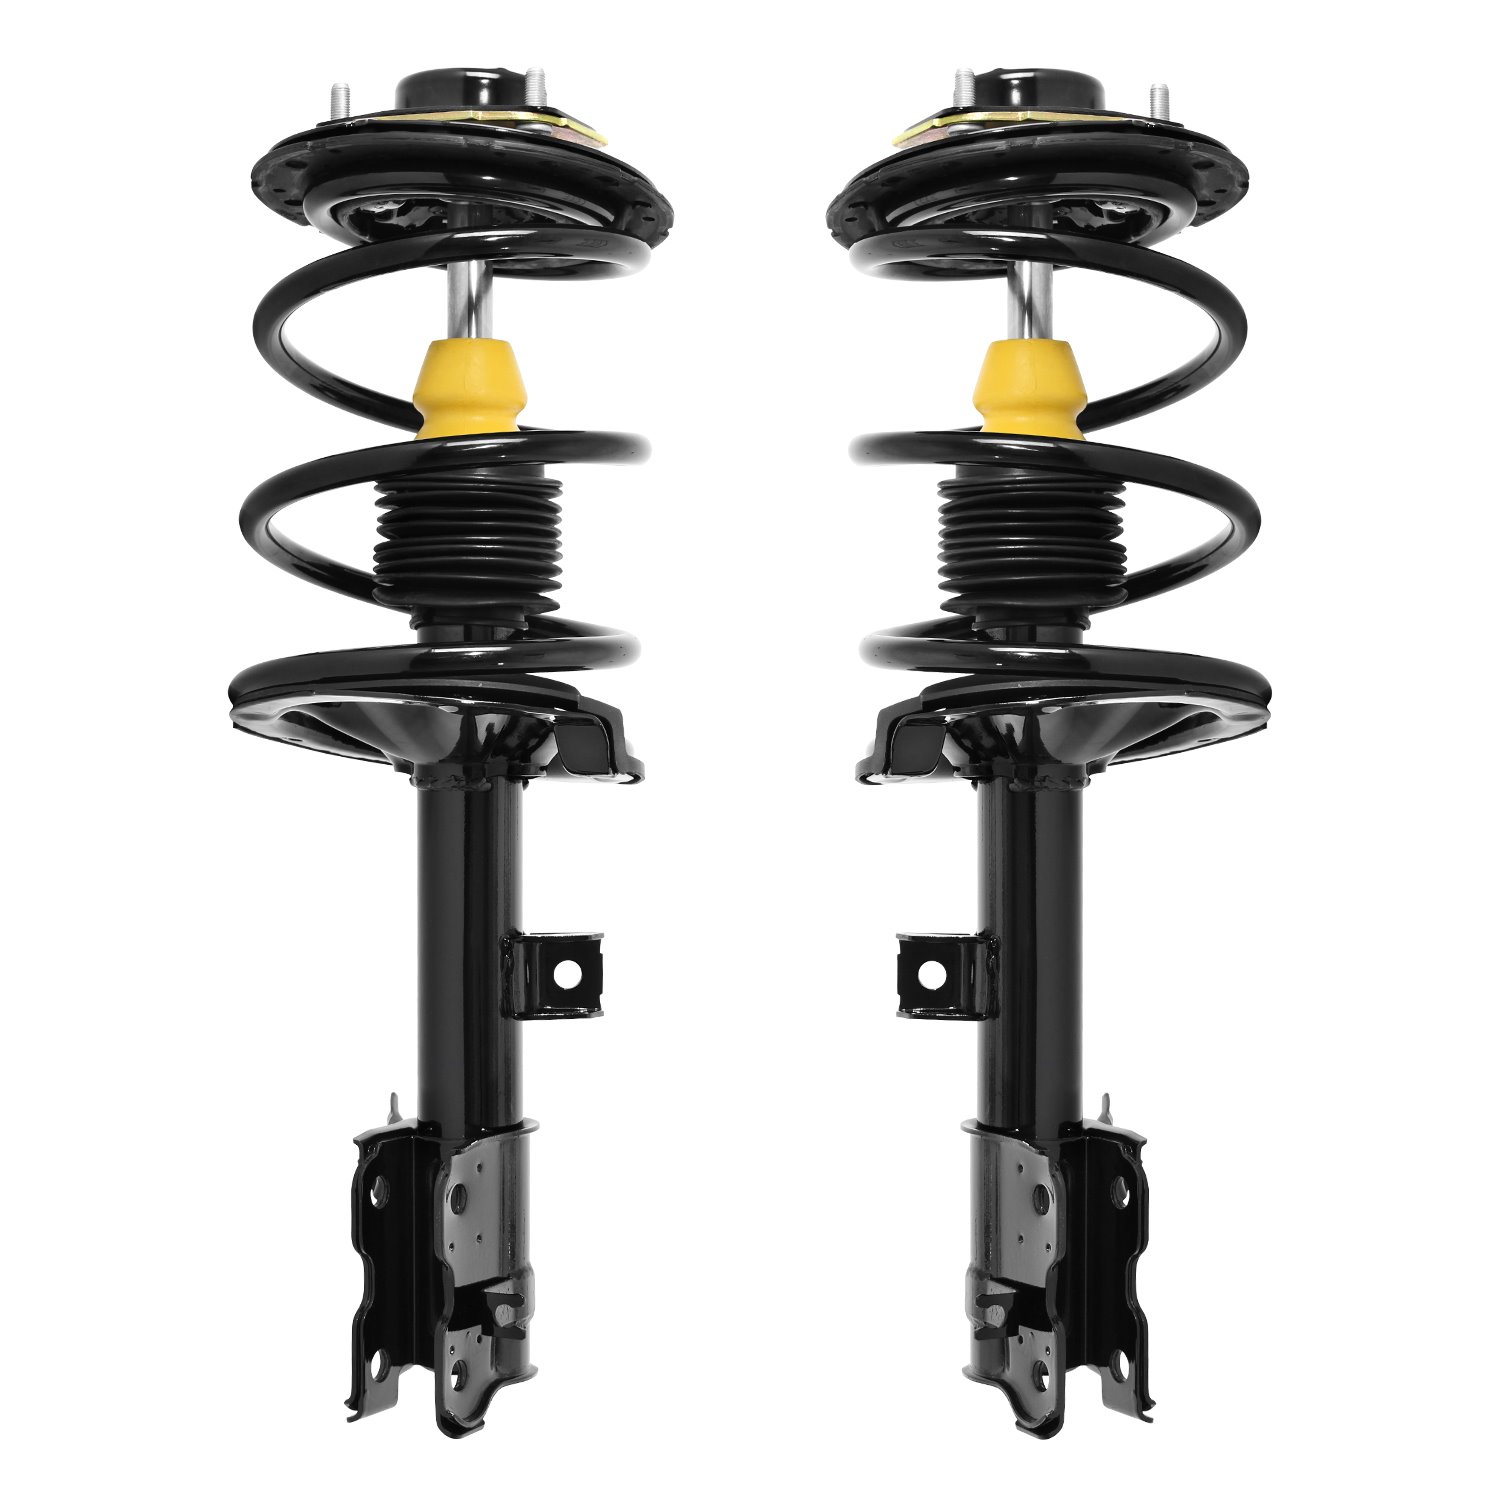 2-11761-11762-001 Suspension Strut & Coil Spring Assembly Set Fits Select Nissan Murano